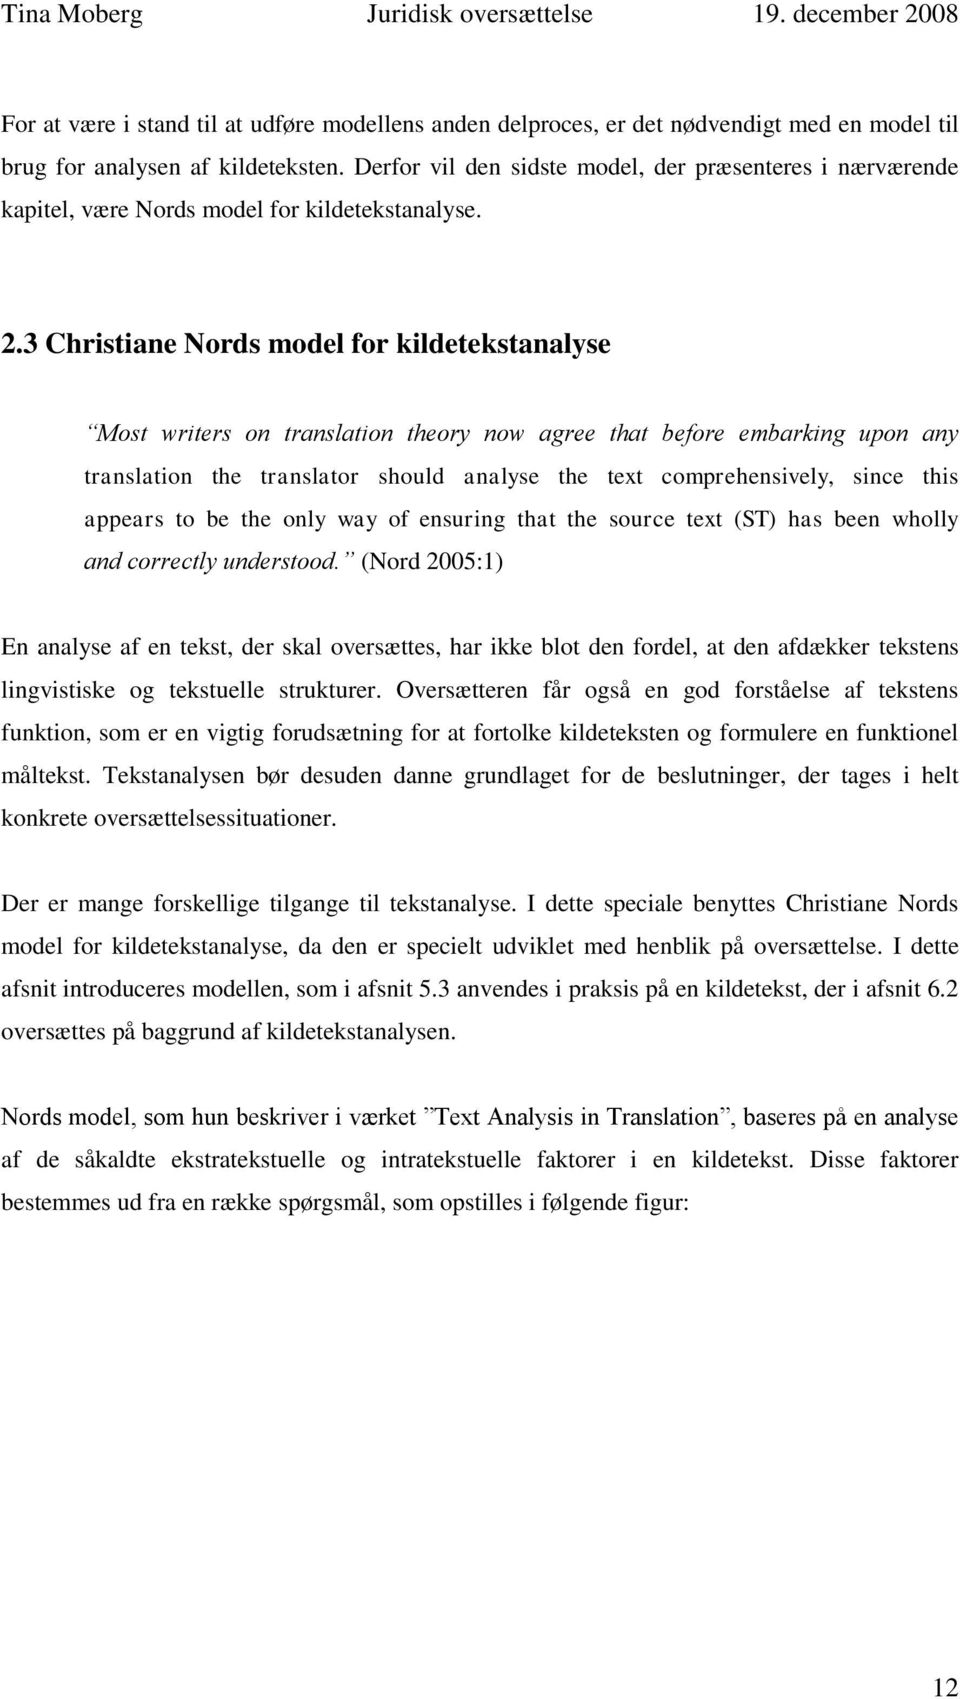 3 Christiane Nords model for kildetekstanalyse Most writers on translation theory now agree that before embarking upon any translation the translator should analyse the text comprehensively, since